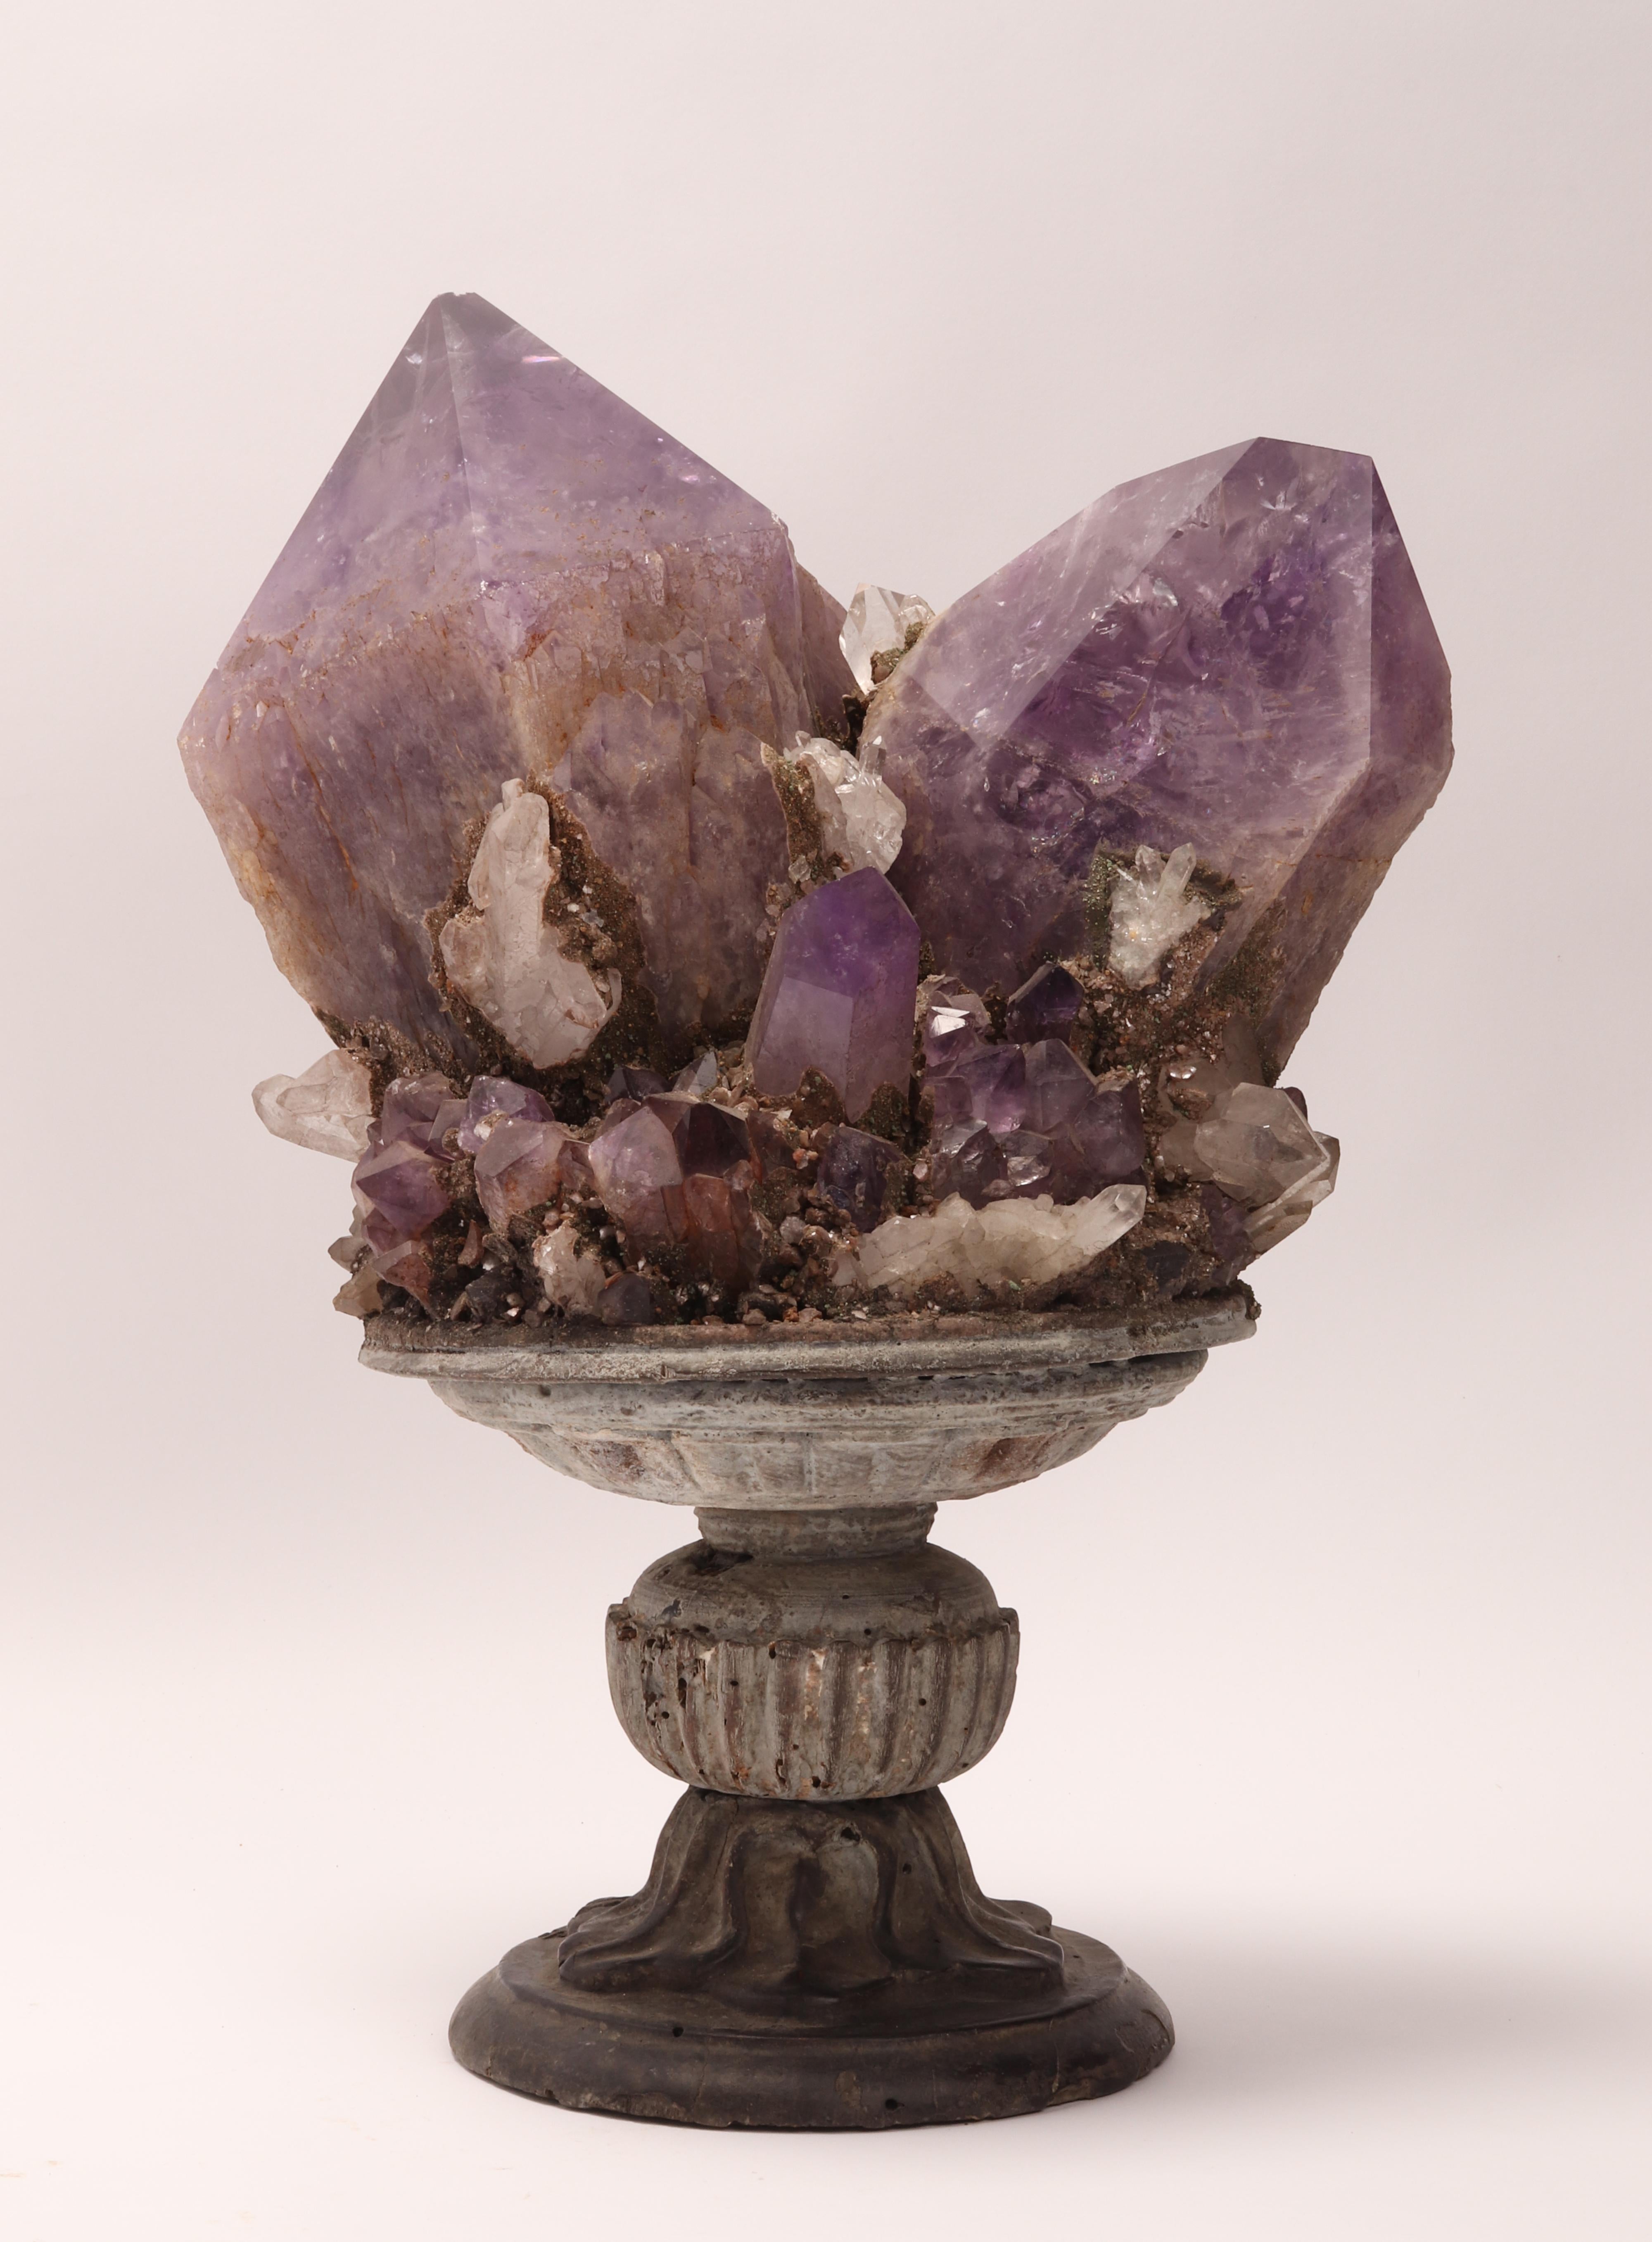 Naturalia mineral specimen. A druse of amethyst and quartz crystals, mounted over a wooden base on a vase shape. Italy 1880 ca.